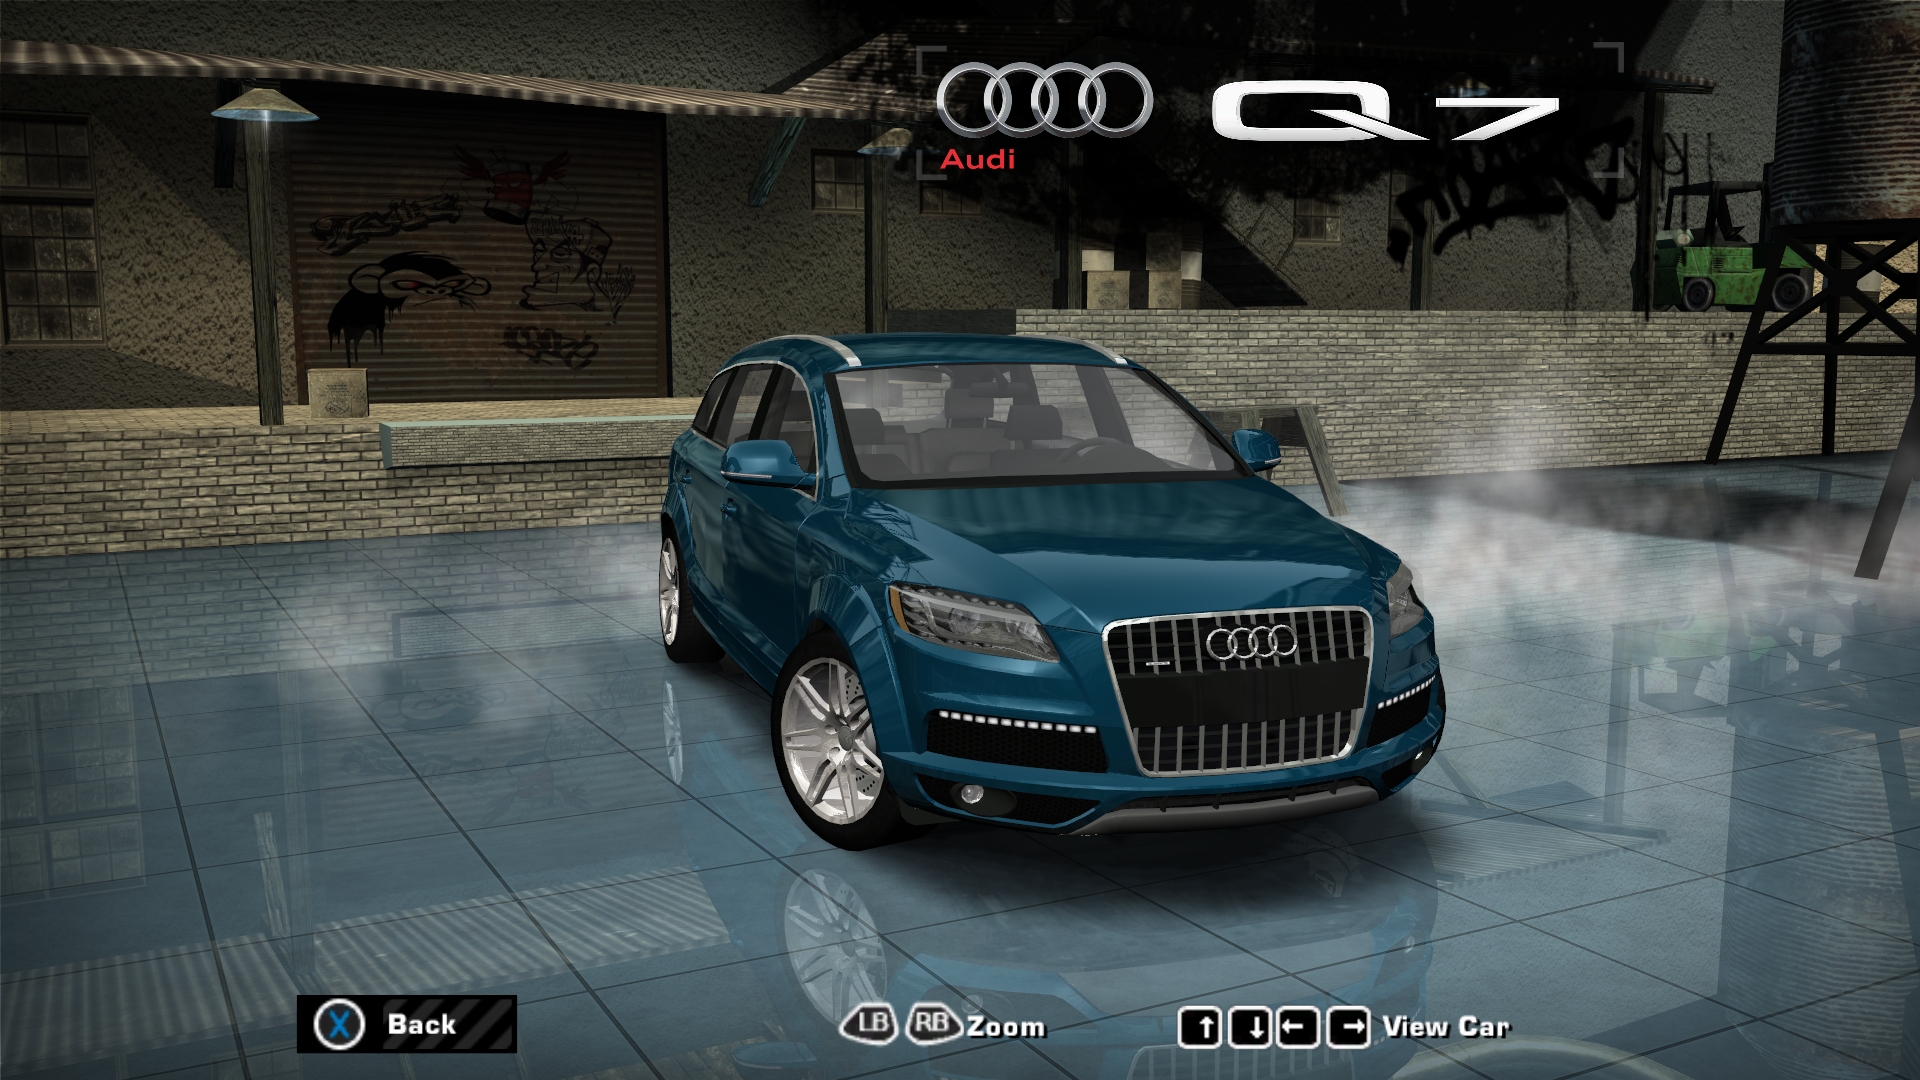 Need For Speed Most Wanted Audi Q7 4.2 FSI Quattro